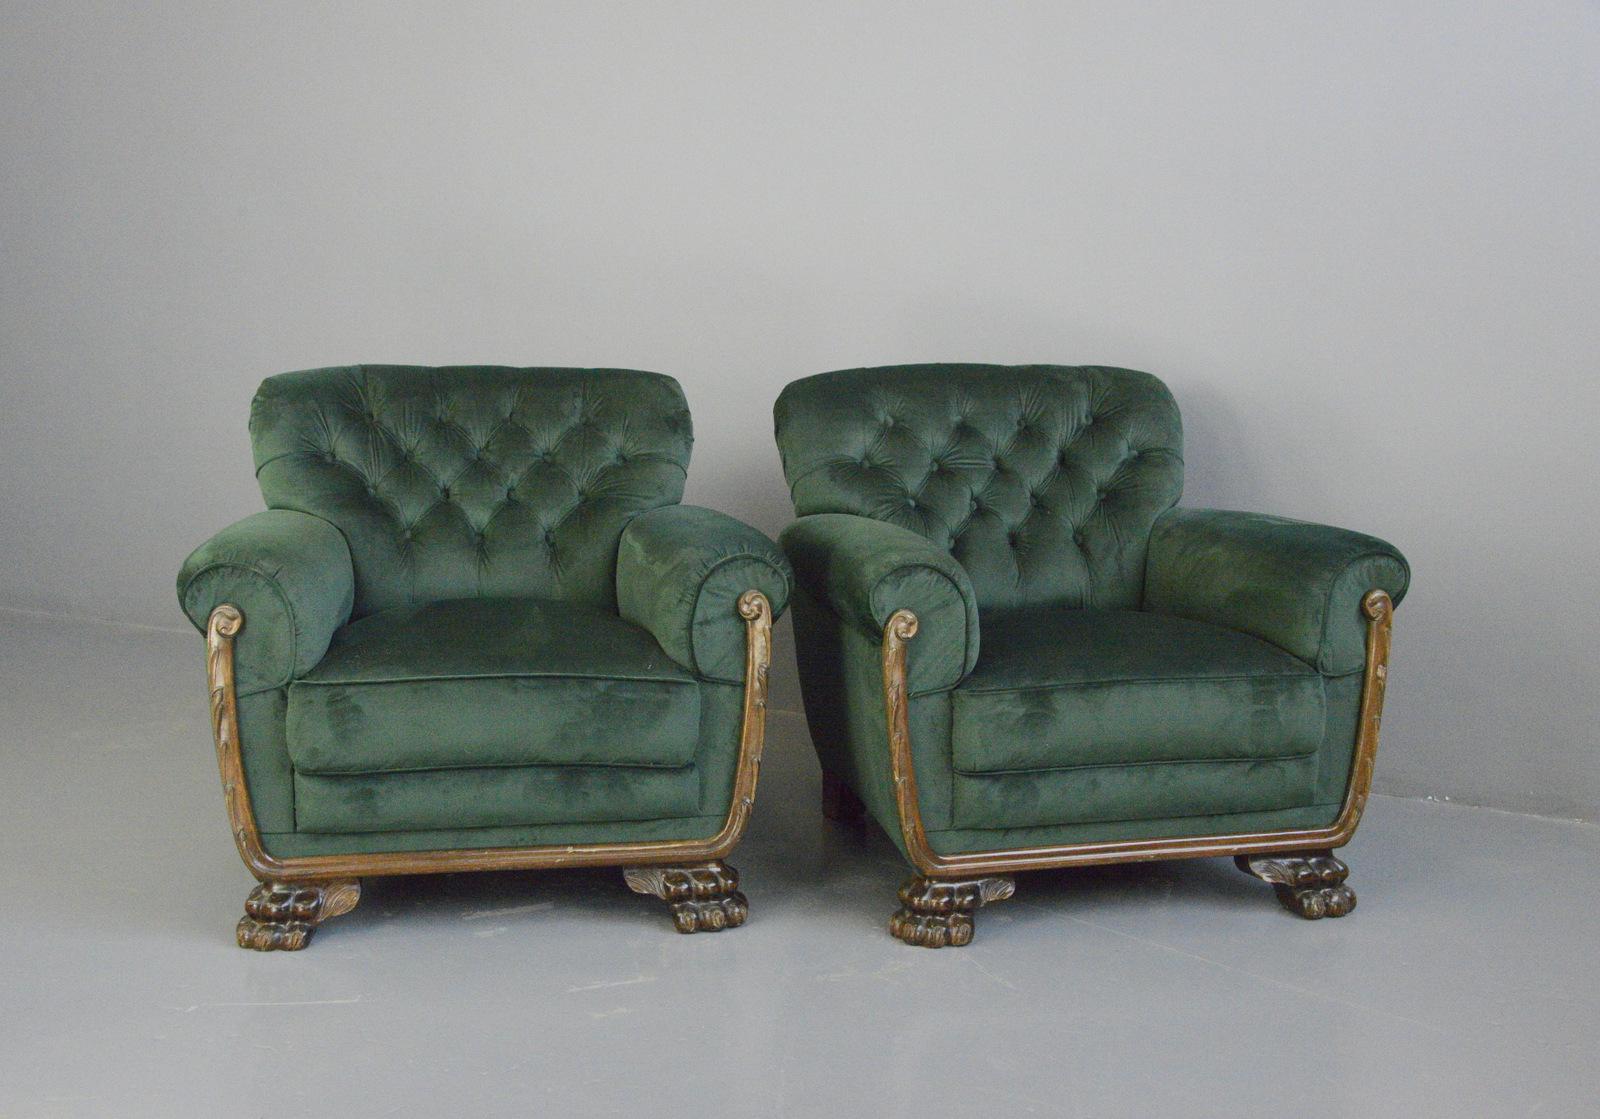 Green velvet German empire armchairs Circa 1900

- Oak feet and frame
- Sprung seats, back and armrests
- Button backed
- Newly upholstered in green velvet upholstery
- German ~ 1900
- 92cm wide x 80cm deep x 80cm tall
- 46cm seat